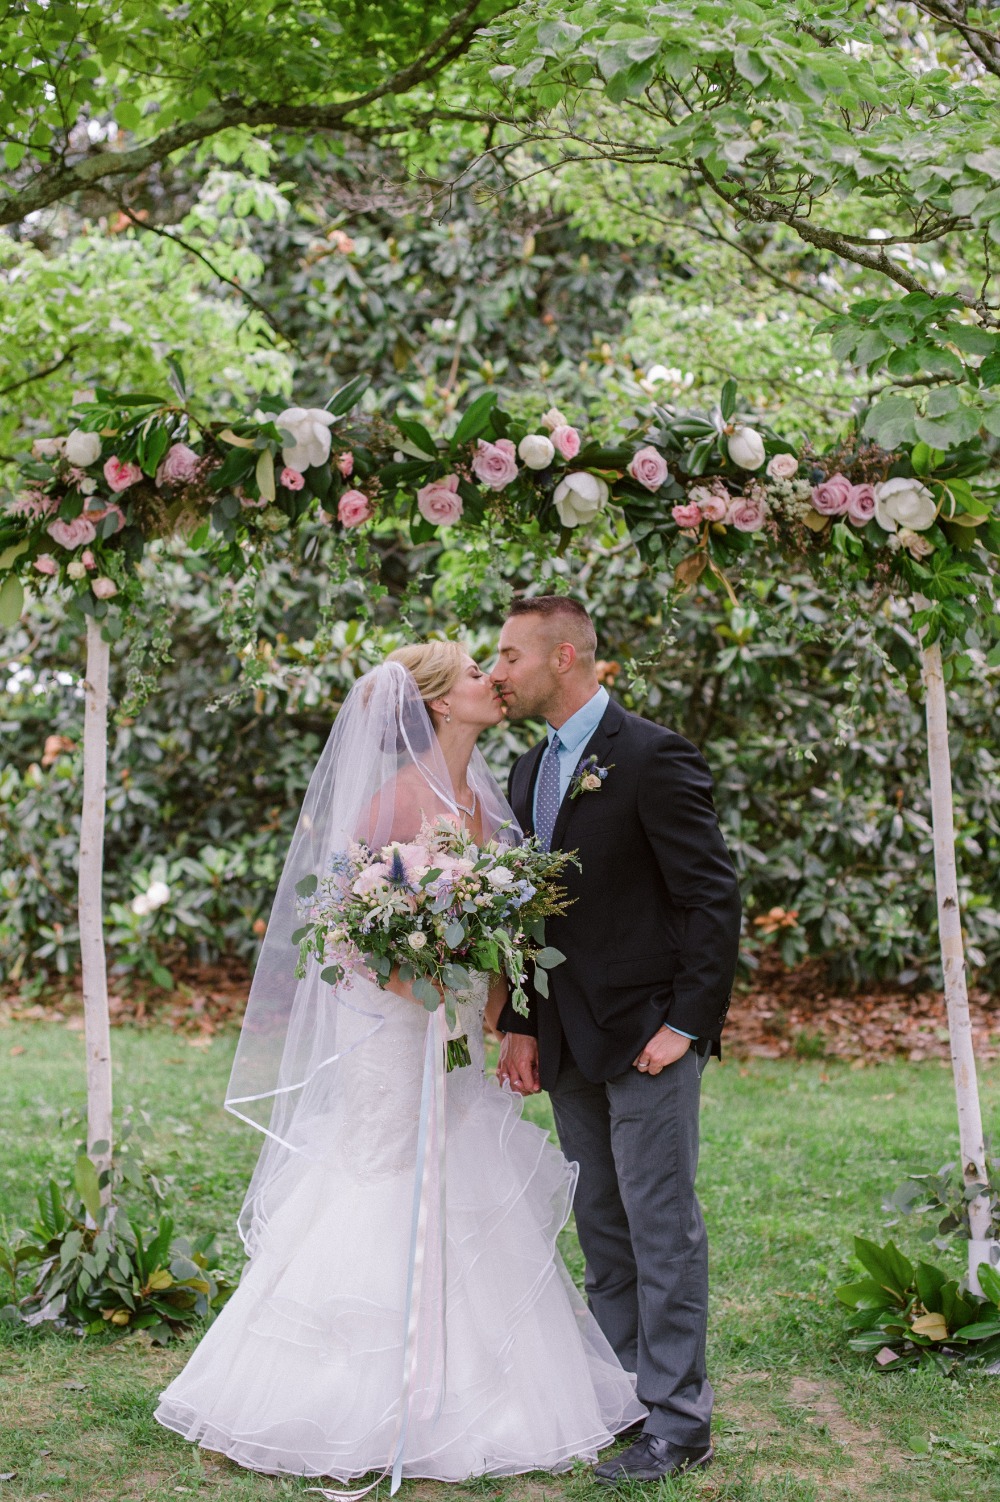 wedding kiss with floral accented wedding arch